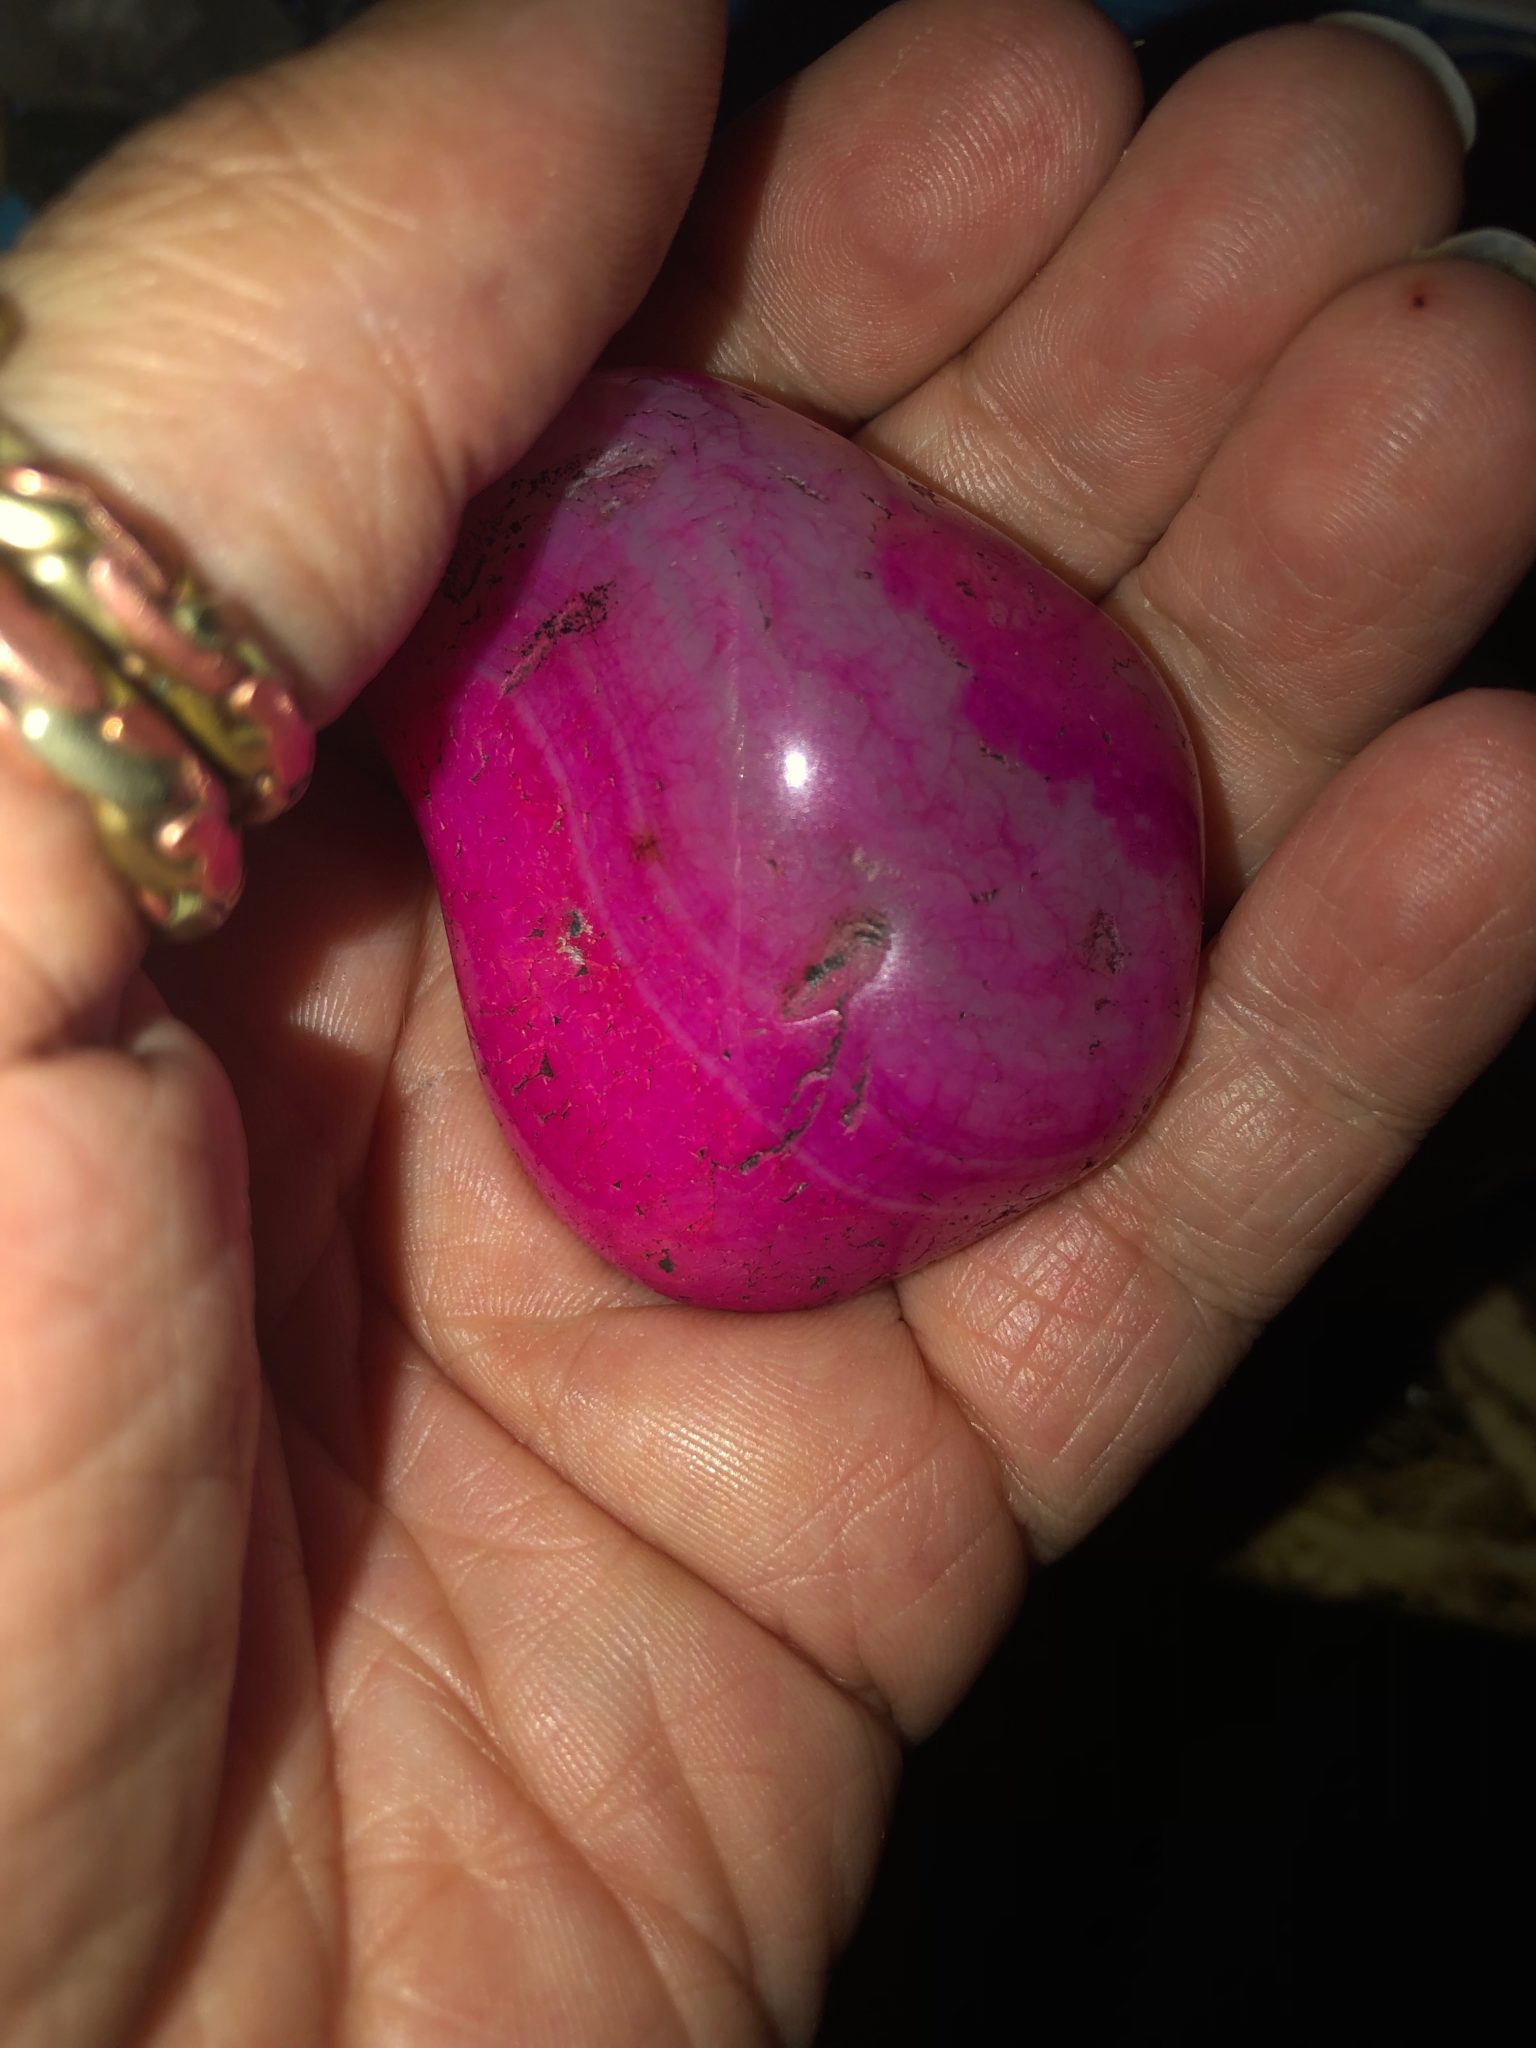 pink agate stone meaning